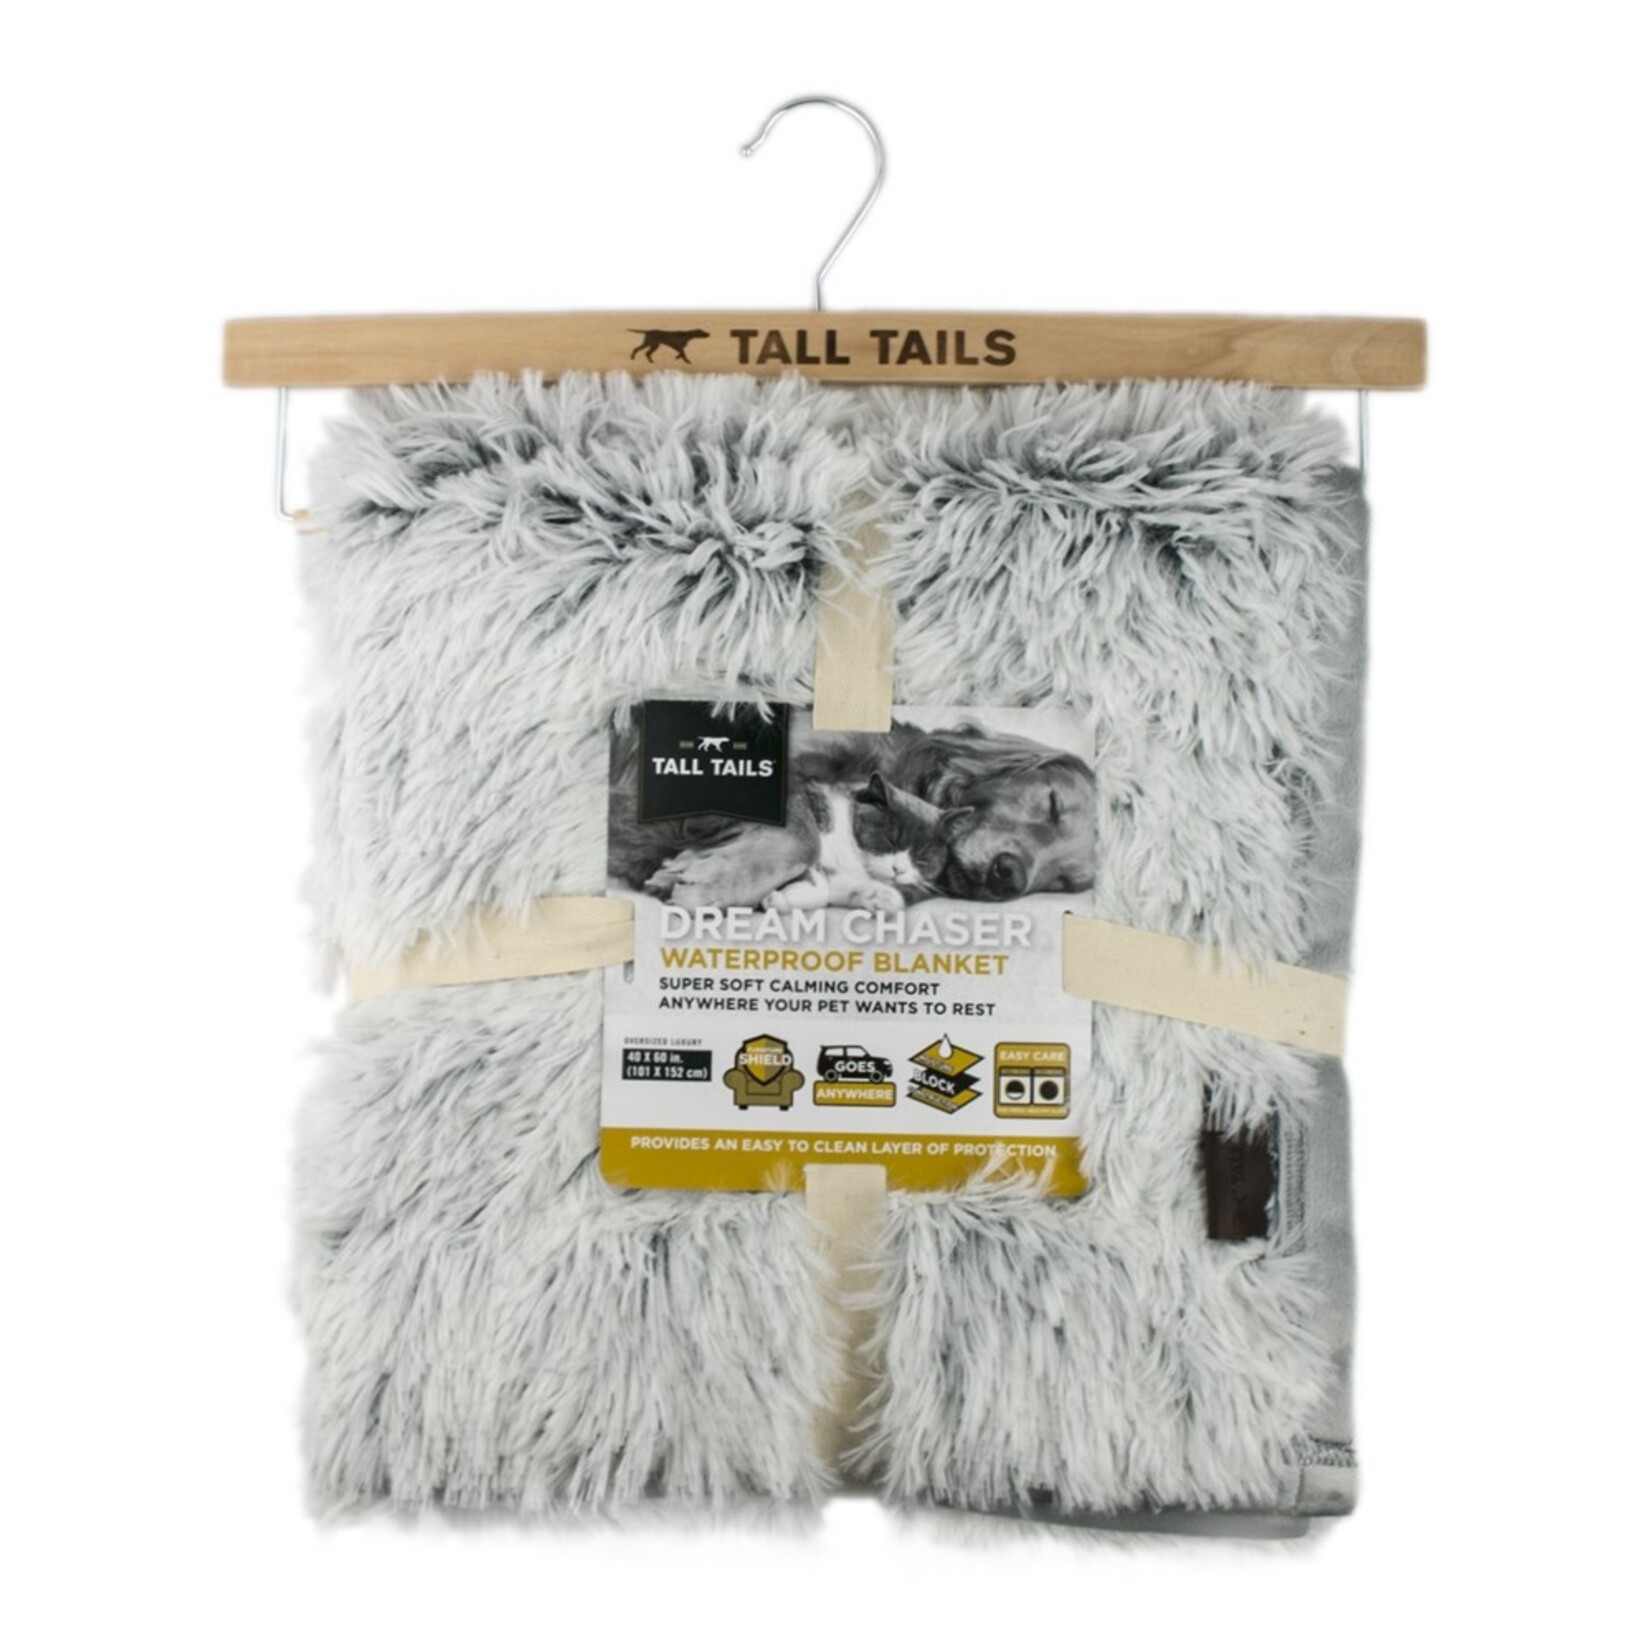 Tall Tails Lg. - 40" x 60" - Frosted Grey Shag - Dream Chaser Waterproof Pet Blanket - Tall Tails